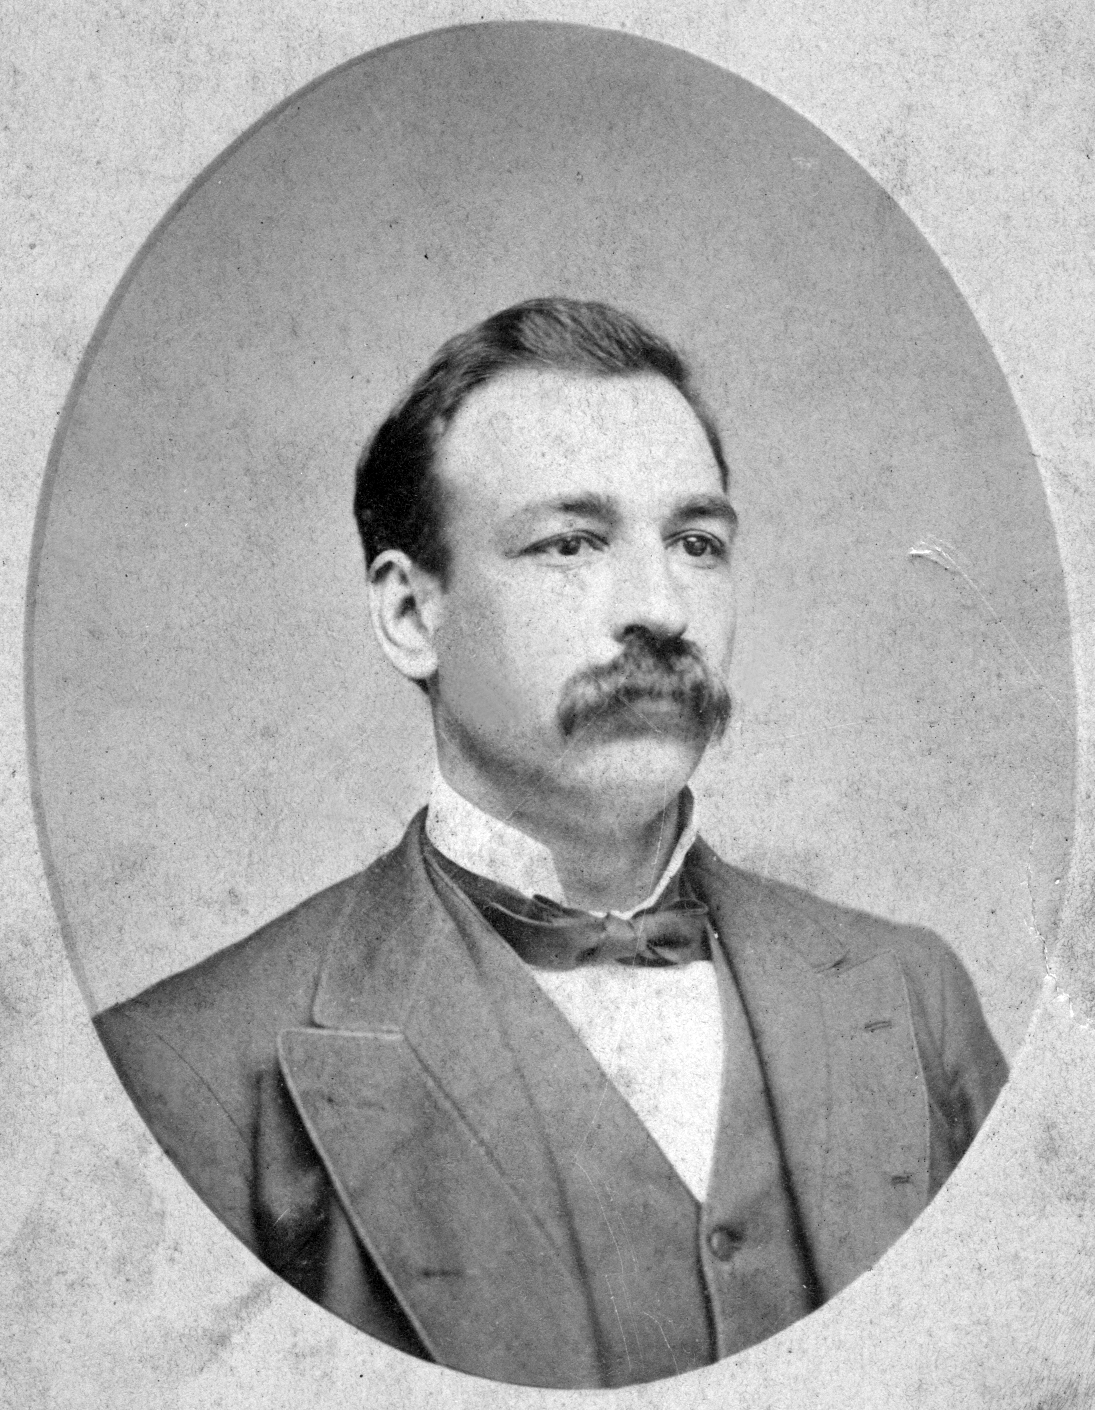 Rufus Rager about 1890